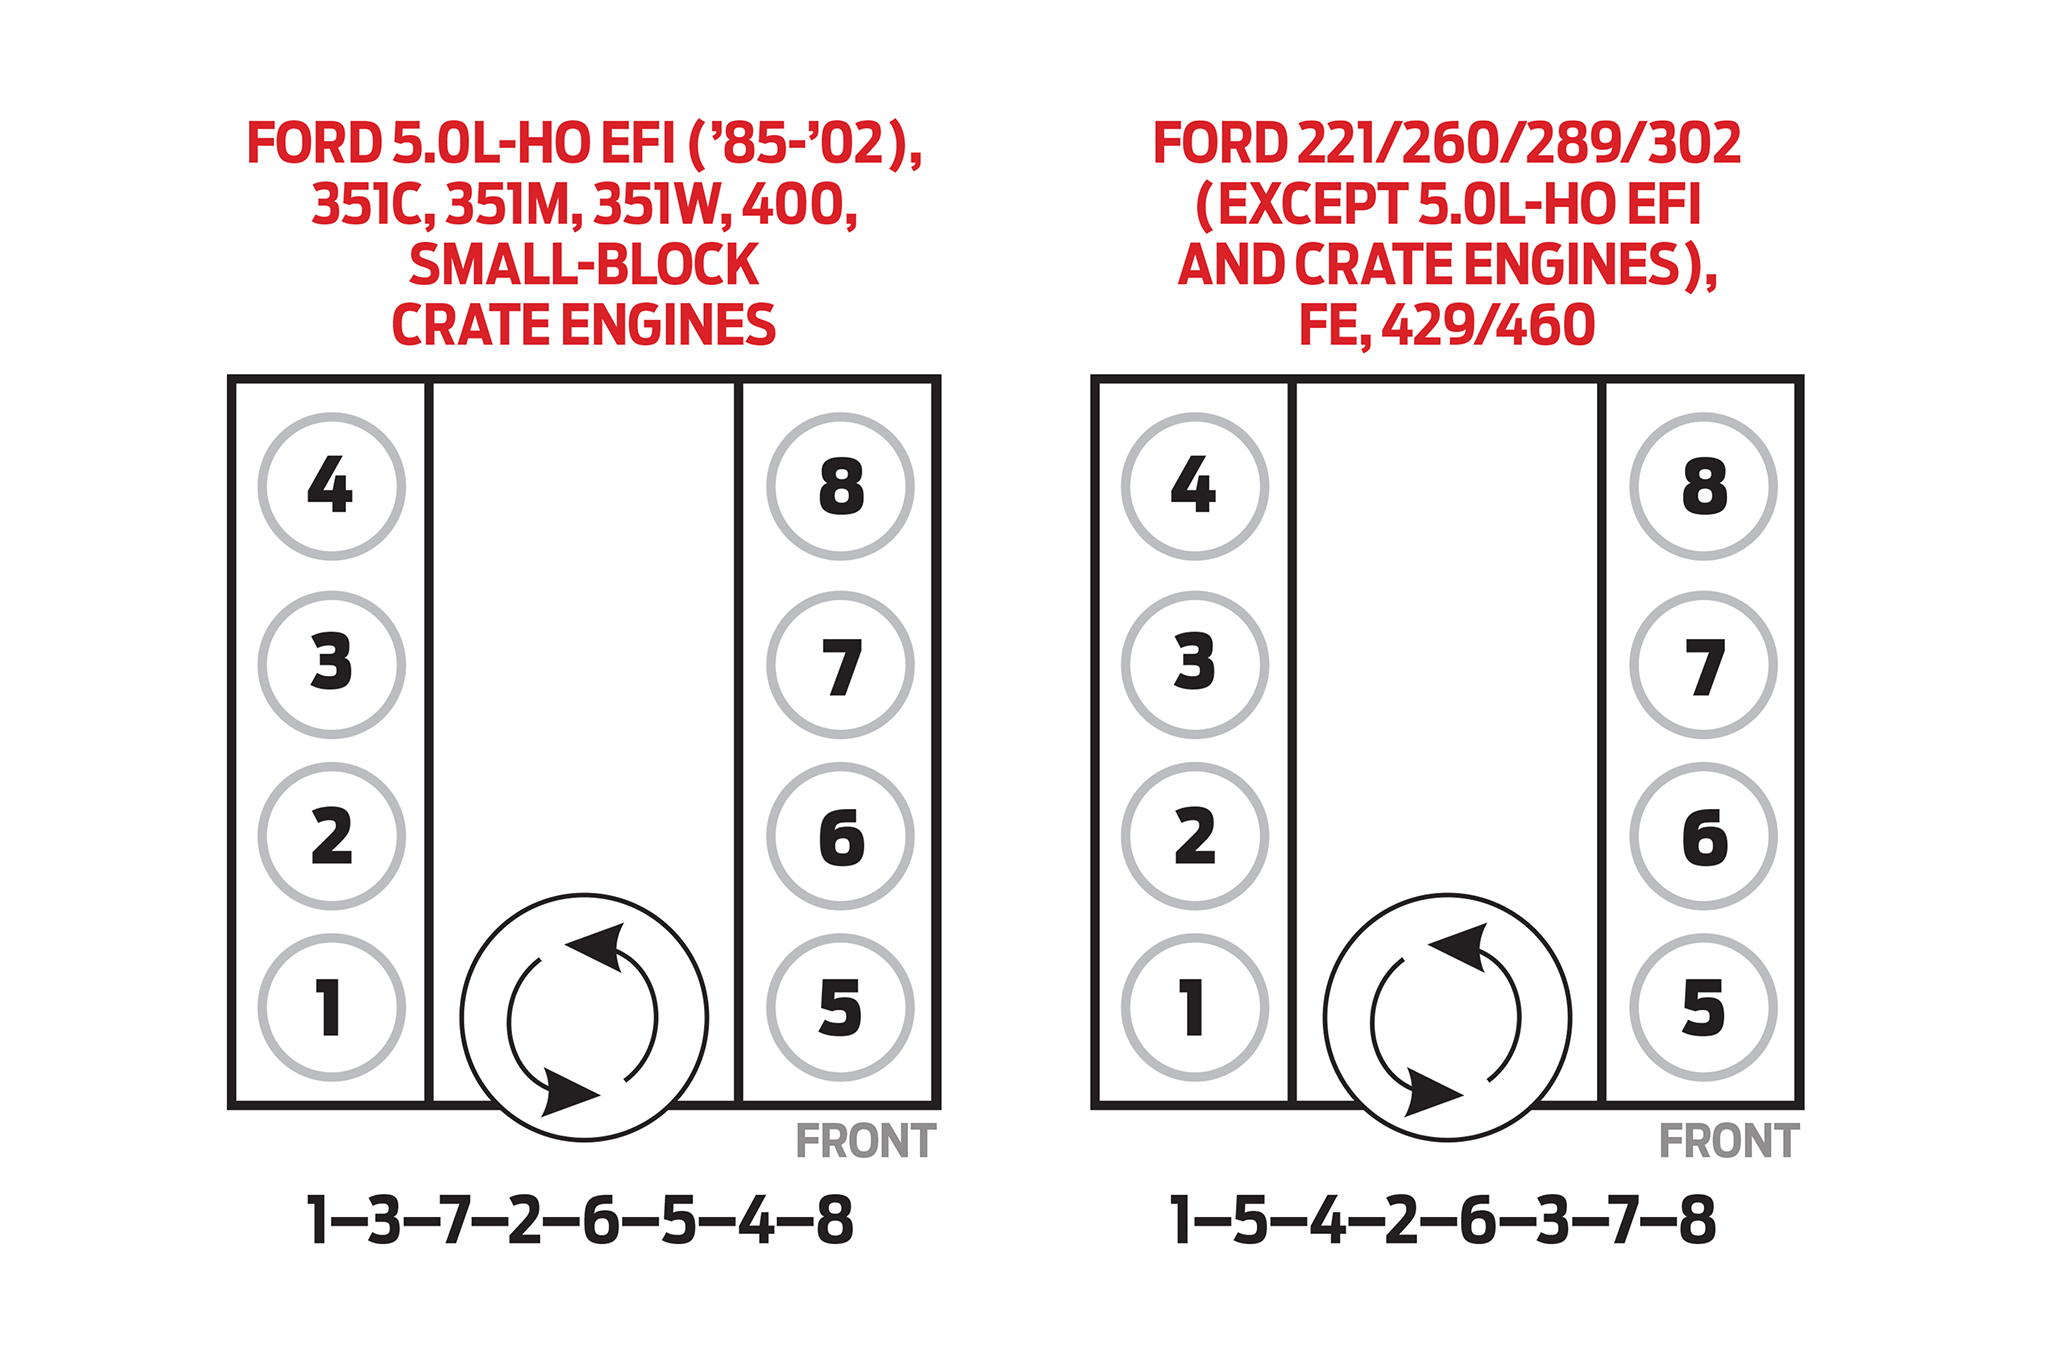 Cfbcf Chevy Small Block Firing Order Manual | Wiring Library